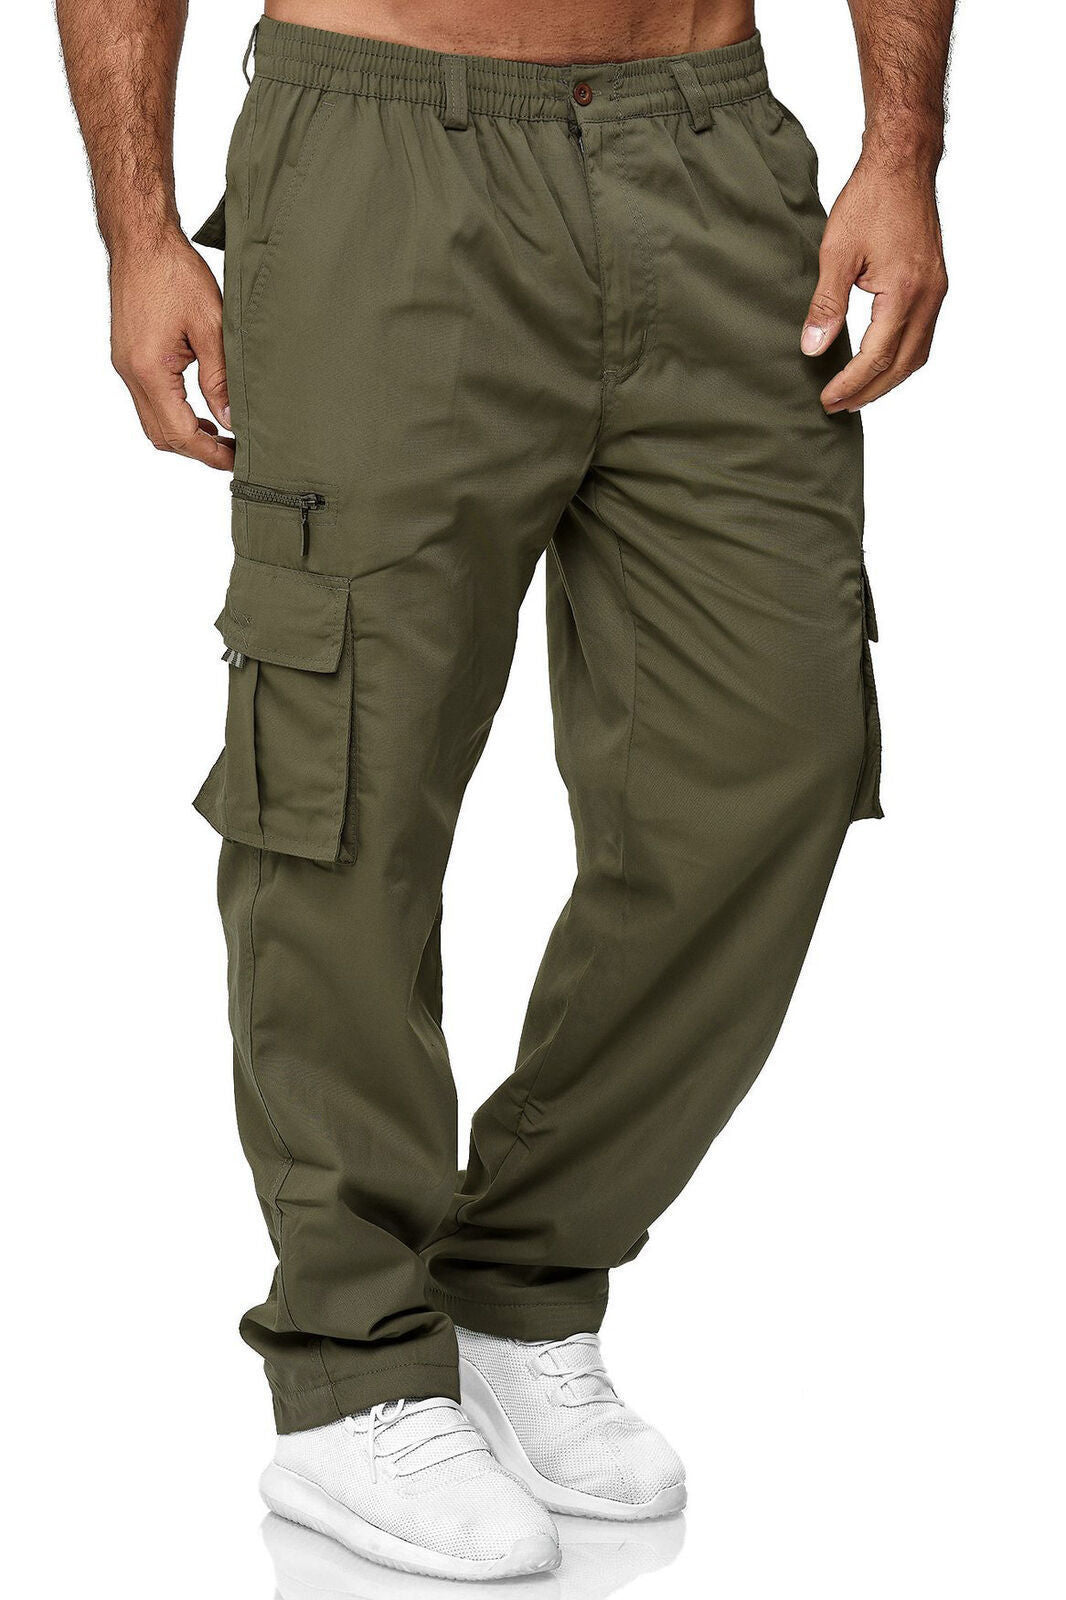 Summer Work Trousers for Men | Cargo Pants with Stretch Waist | Loose Fit Multi-Pocket Casual Trousers for Sports & Outdoor Wear